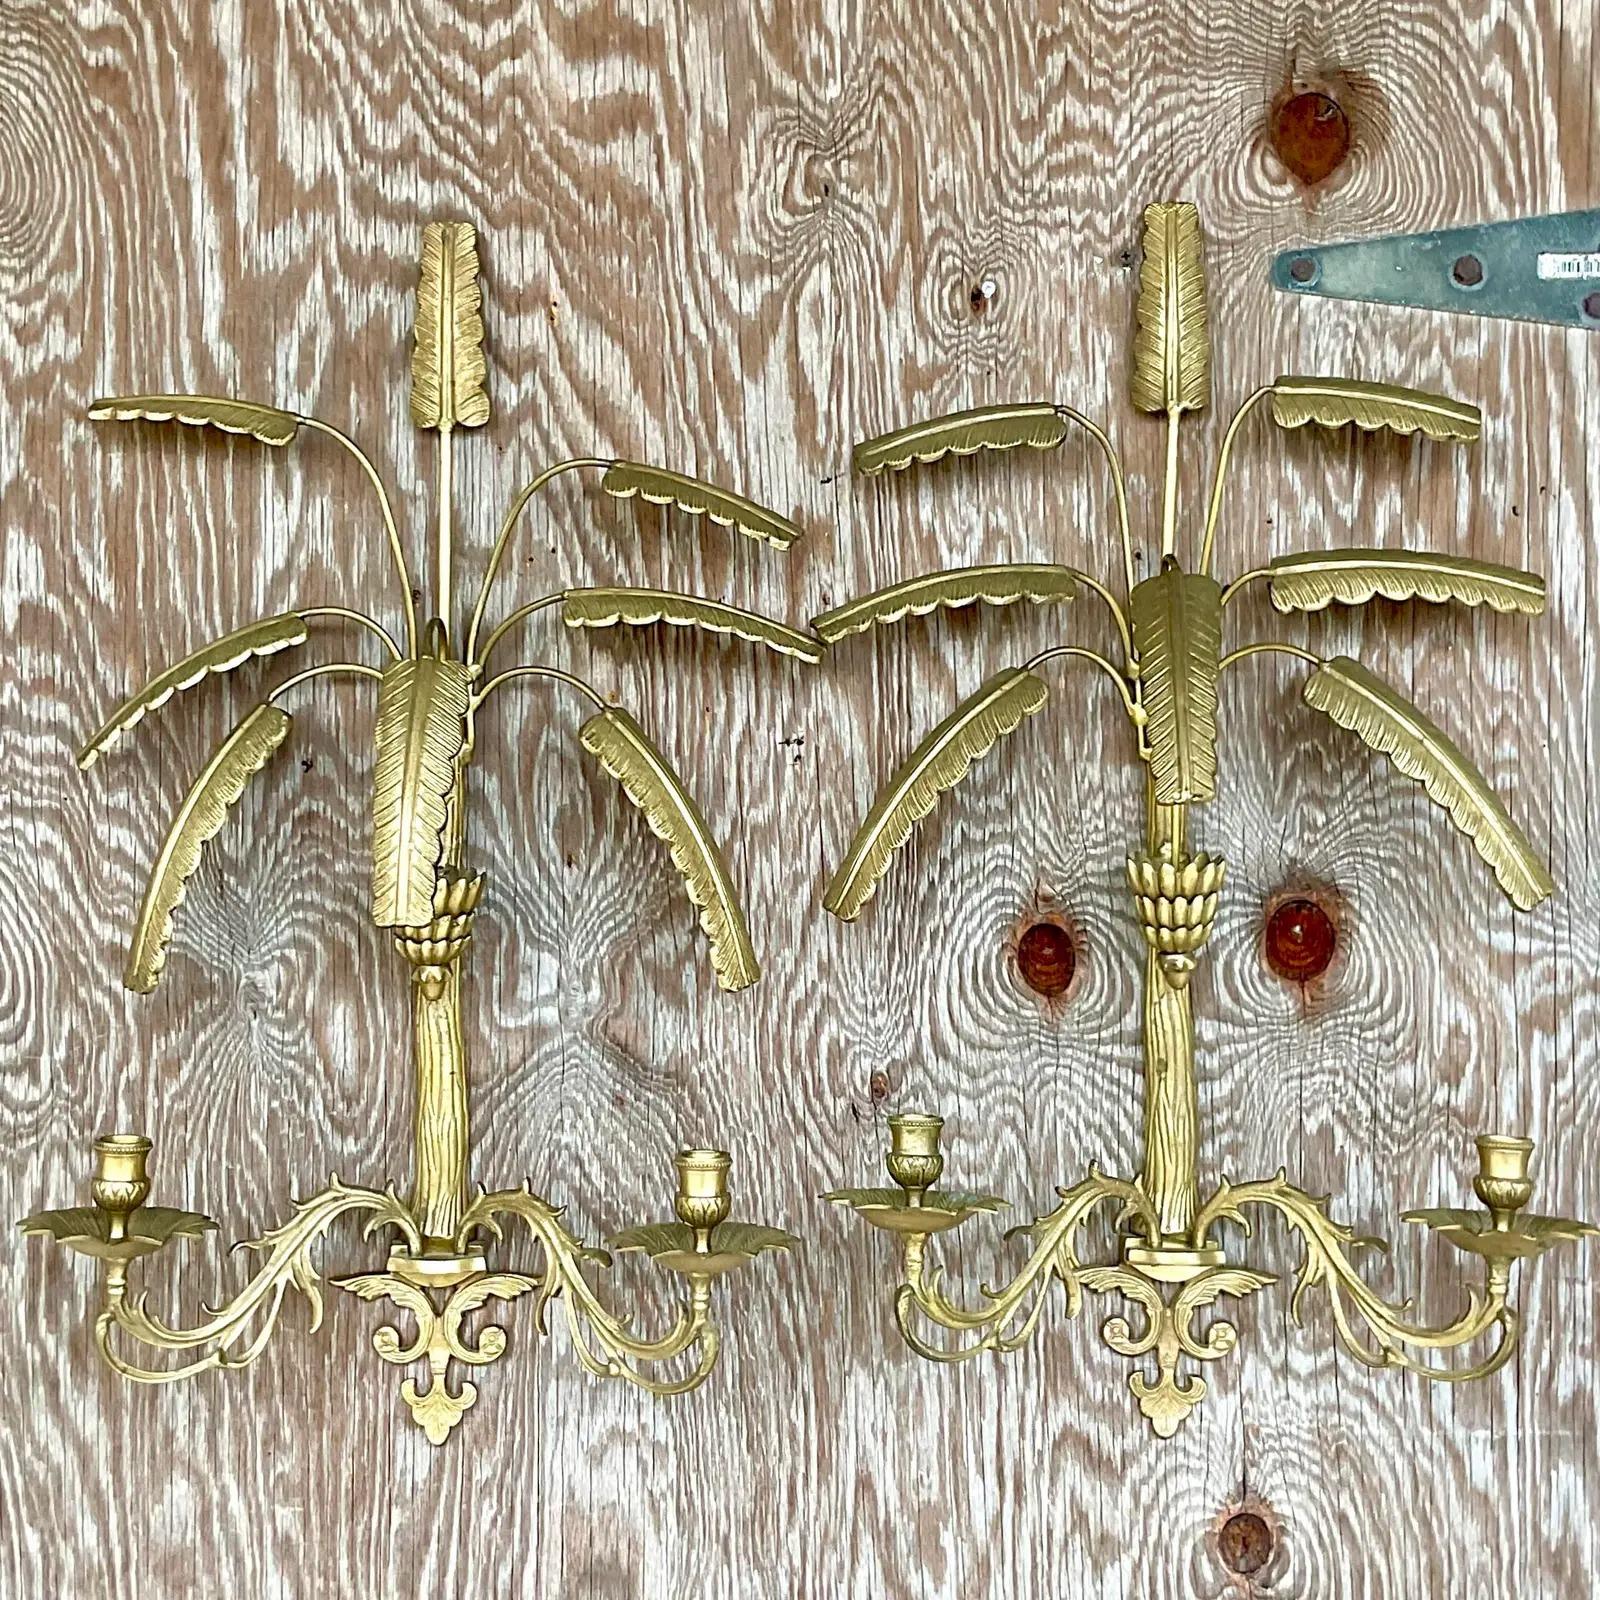 Fantastic pair of vintage Regency brass wall candelabras. Beautiful palm tree design with two candle holders each. Acquired from a Palm Beach estate.